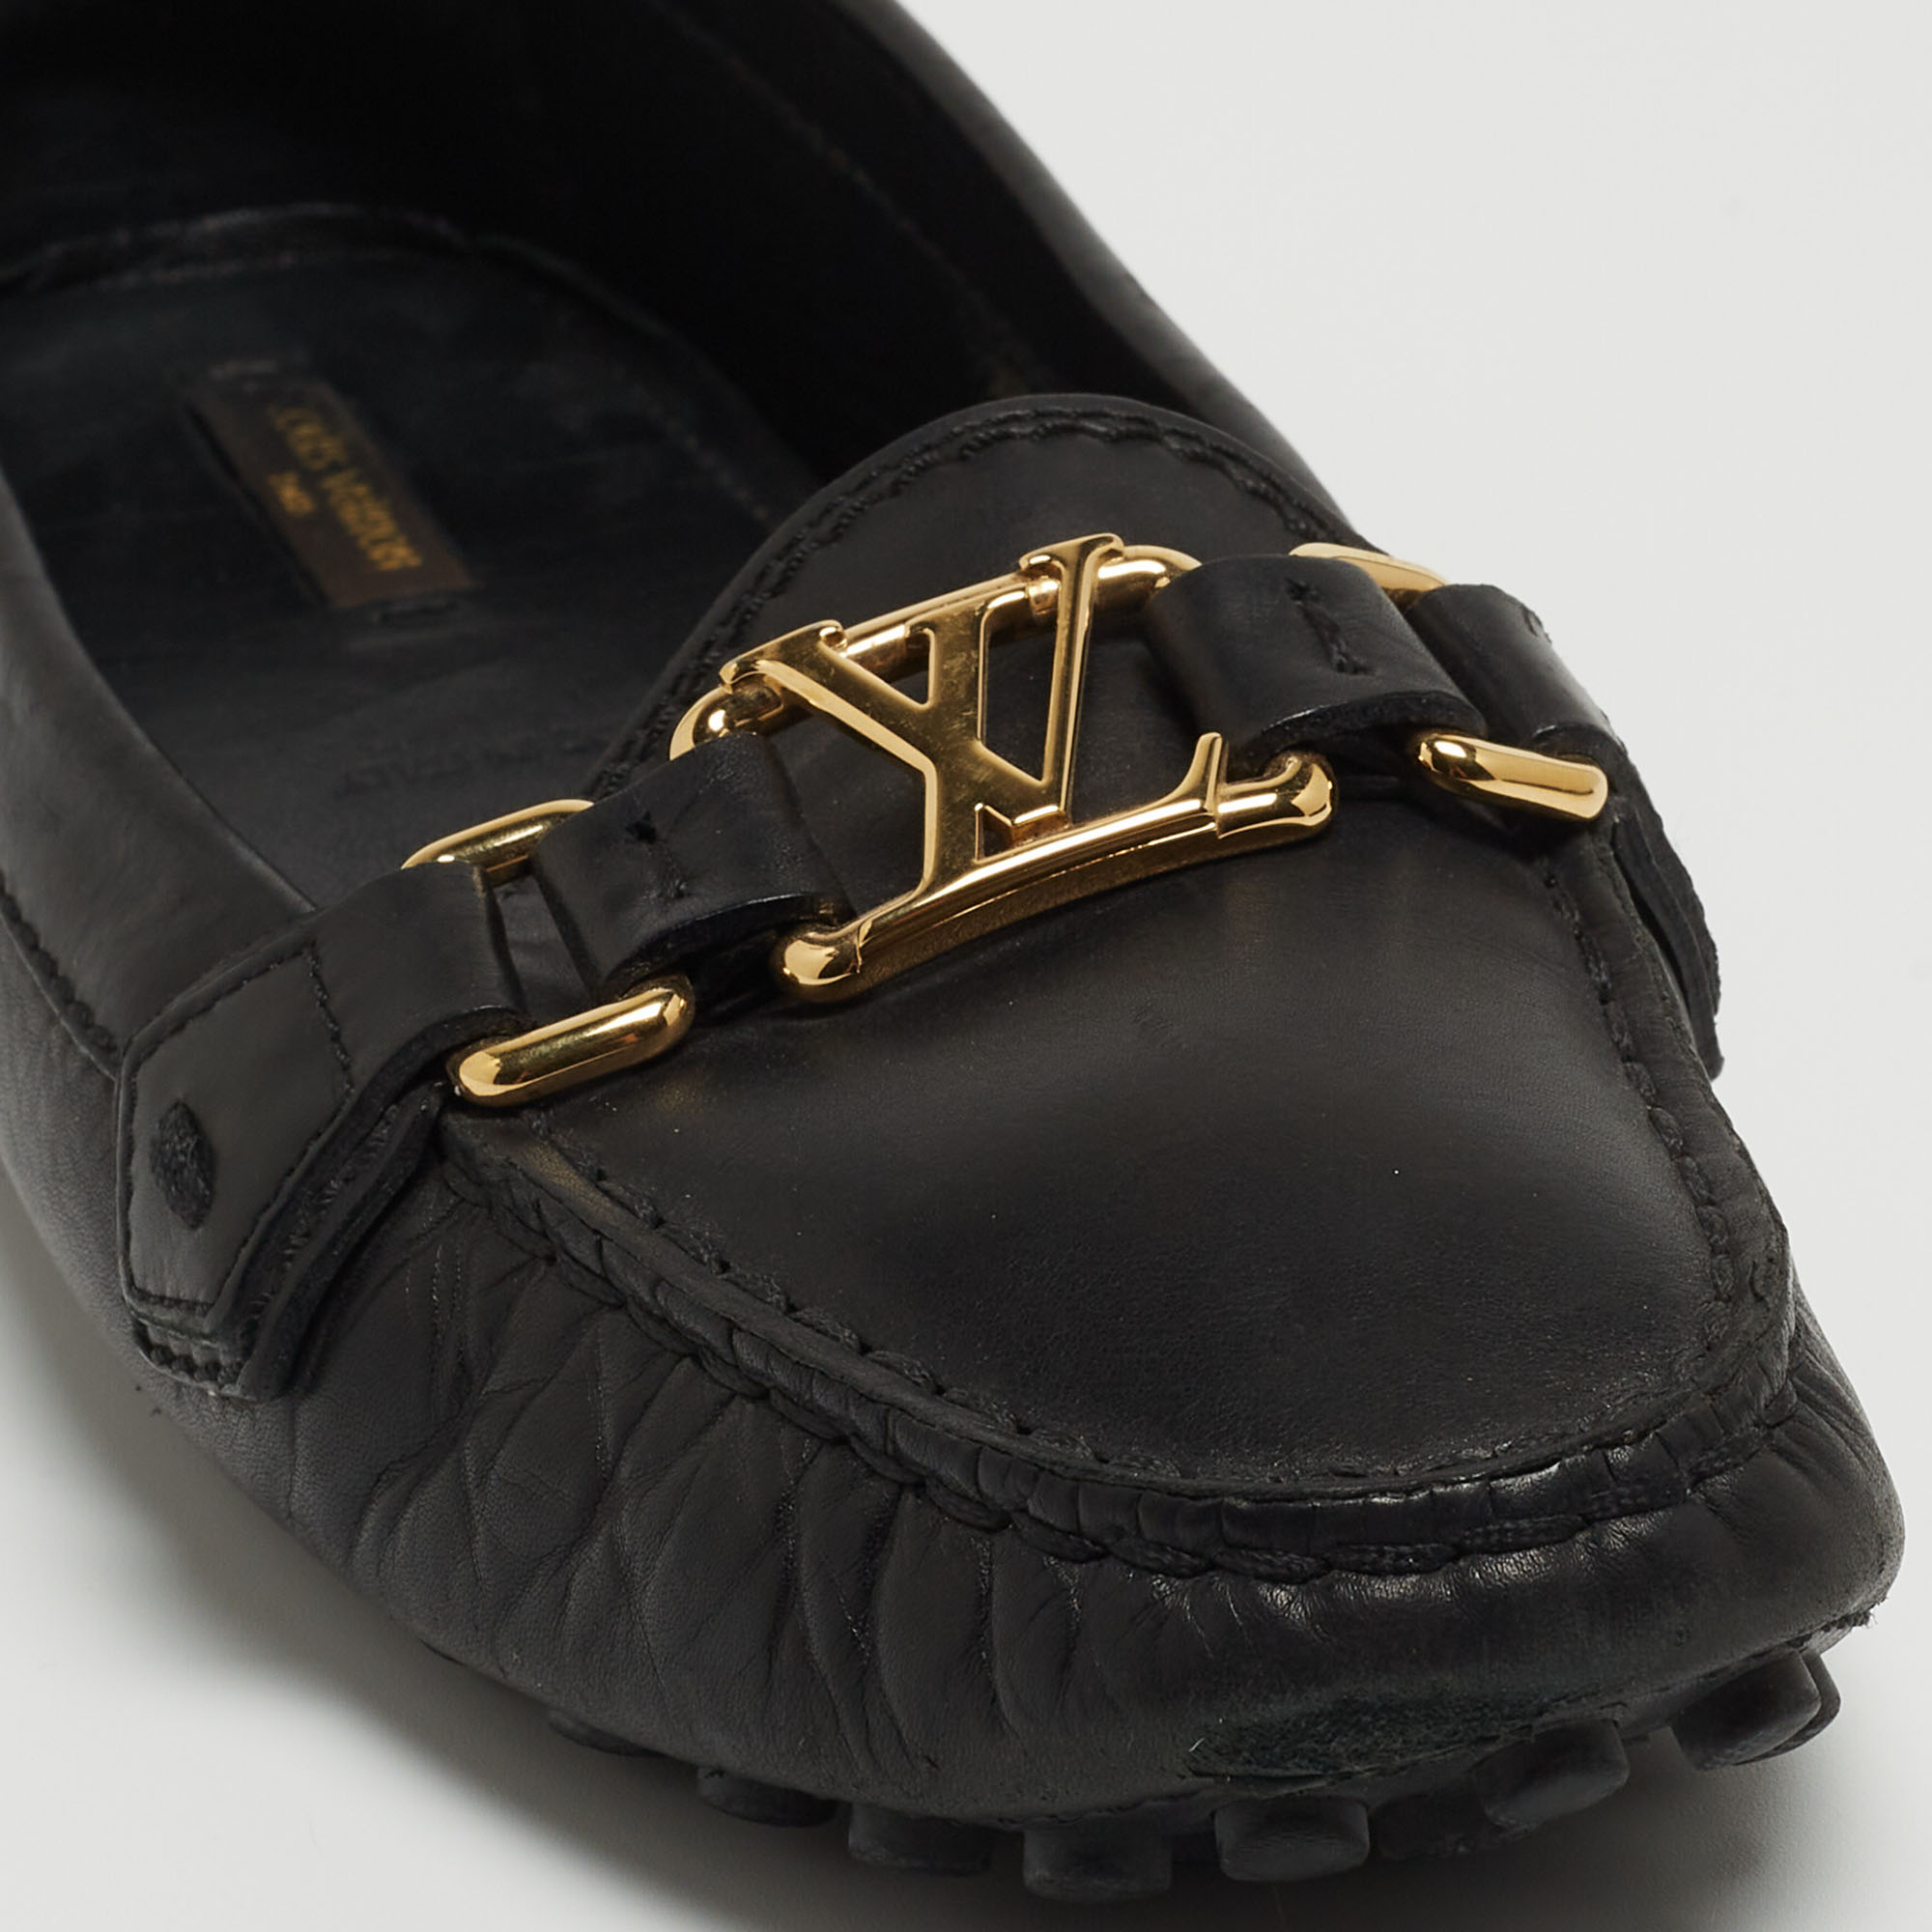 Louis Vuitton Black Leather Oxford Loafers Size 38.5